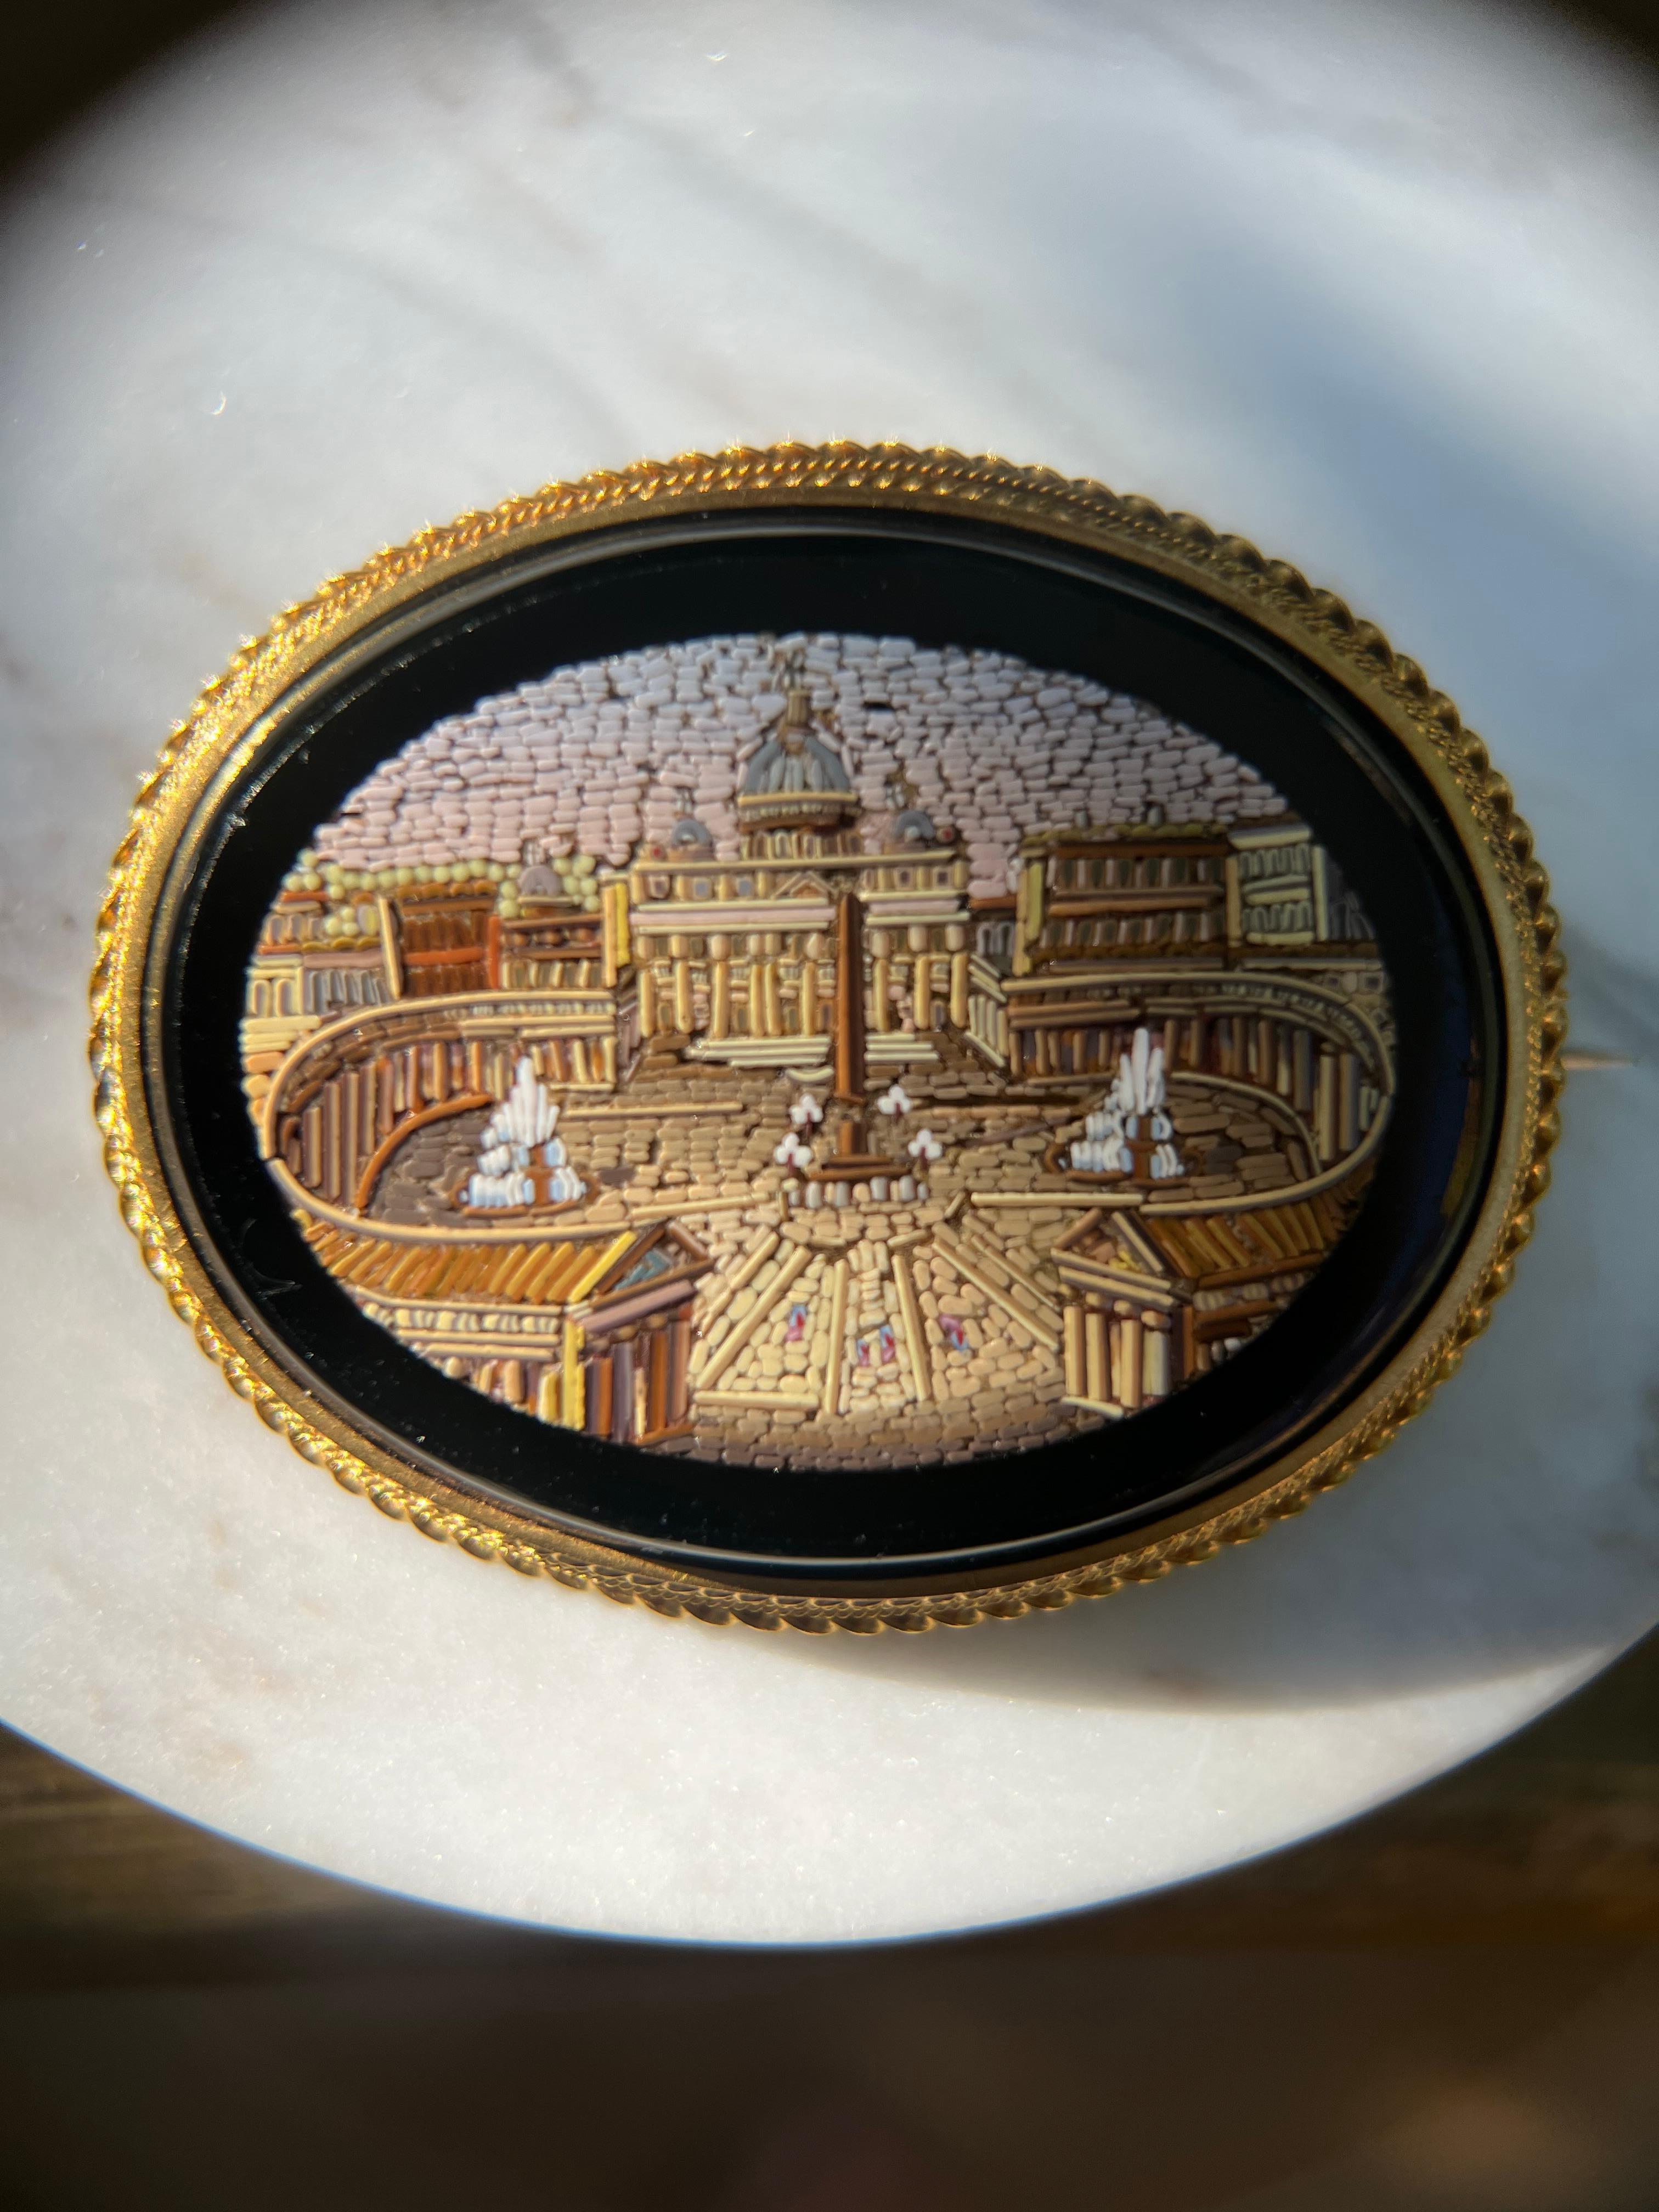 One 14 karat yellow gold micro mosaic brooch depicting St. Peter's Square in Italy.  The brooch measures 1.75 inches and is complete with a traditional pin closure.  